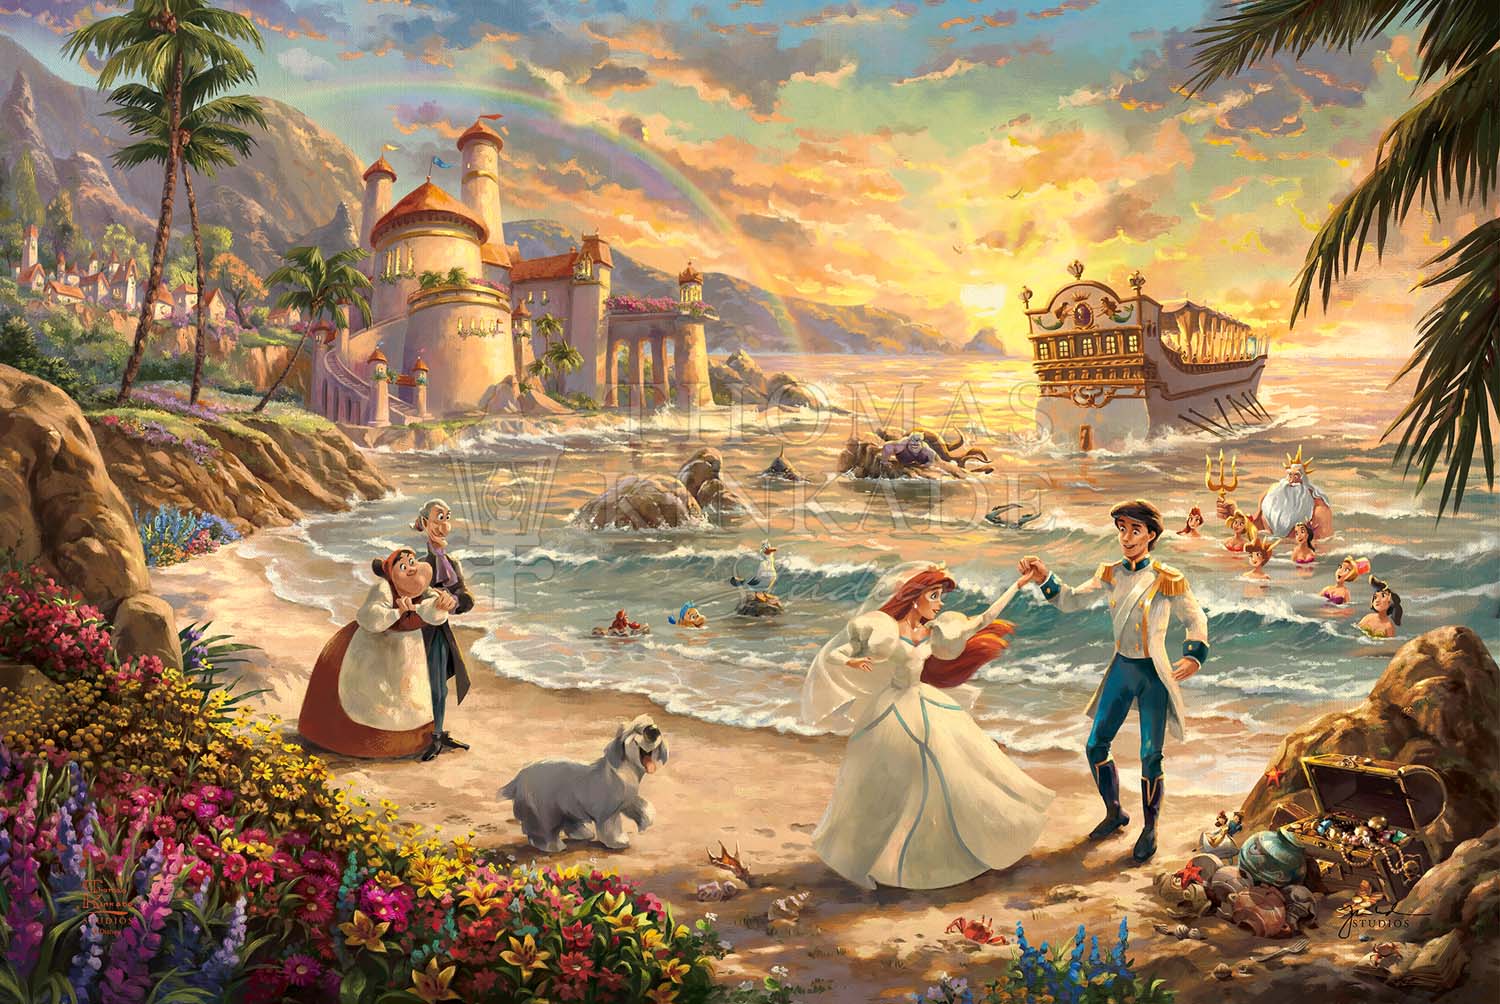 Ariel dances on the sand with her one true love Prince Eric. Max is happily dancing beside them as Sebastian, Flounder, and Scuttle watch from the shore. Ariel’s father, King Triton, sweetly smiles beside his other daughters as they celebrate the love she has found. - Unframed